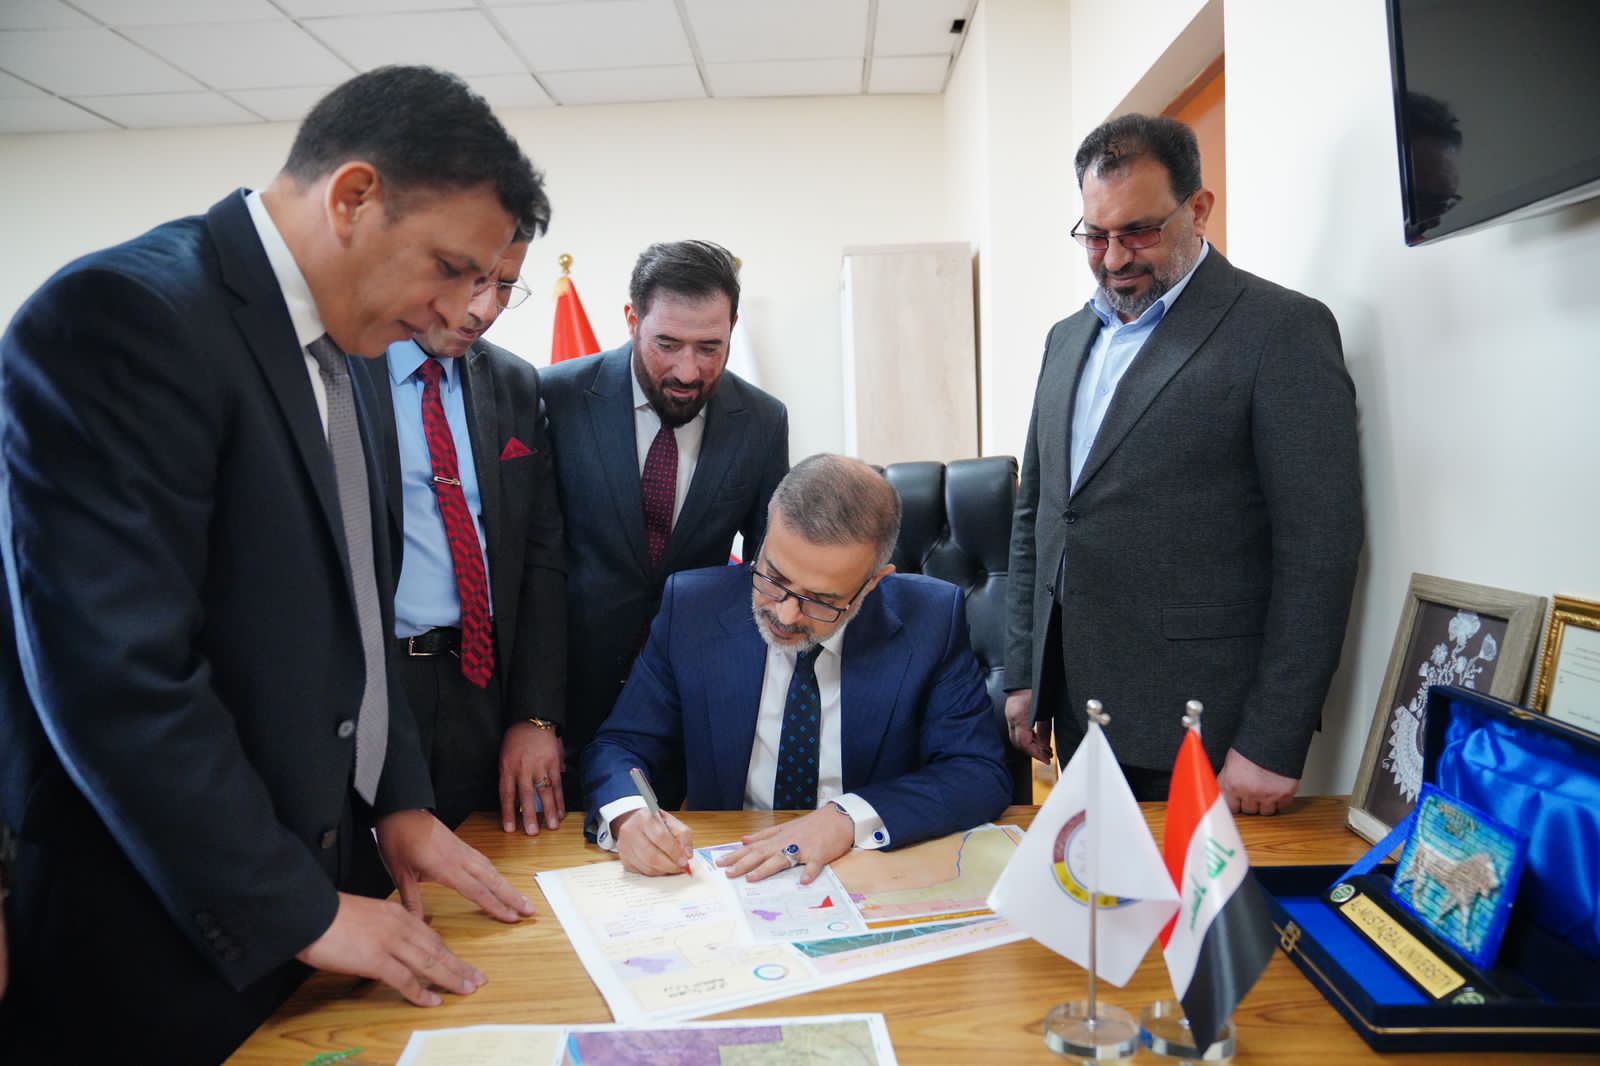 Deputy Prime Minister, minister of planning, approves the creation of the Safwan district and the Al-Khor district in the Basra Governorate